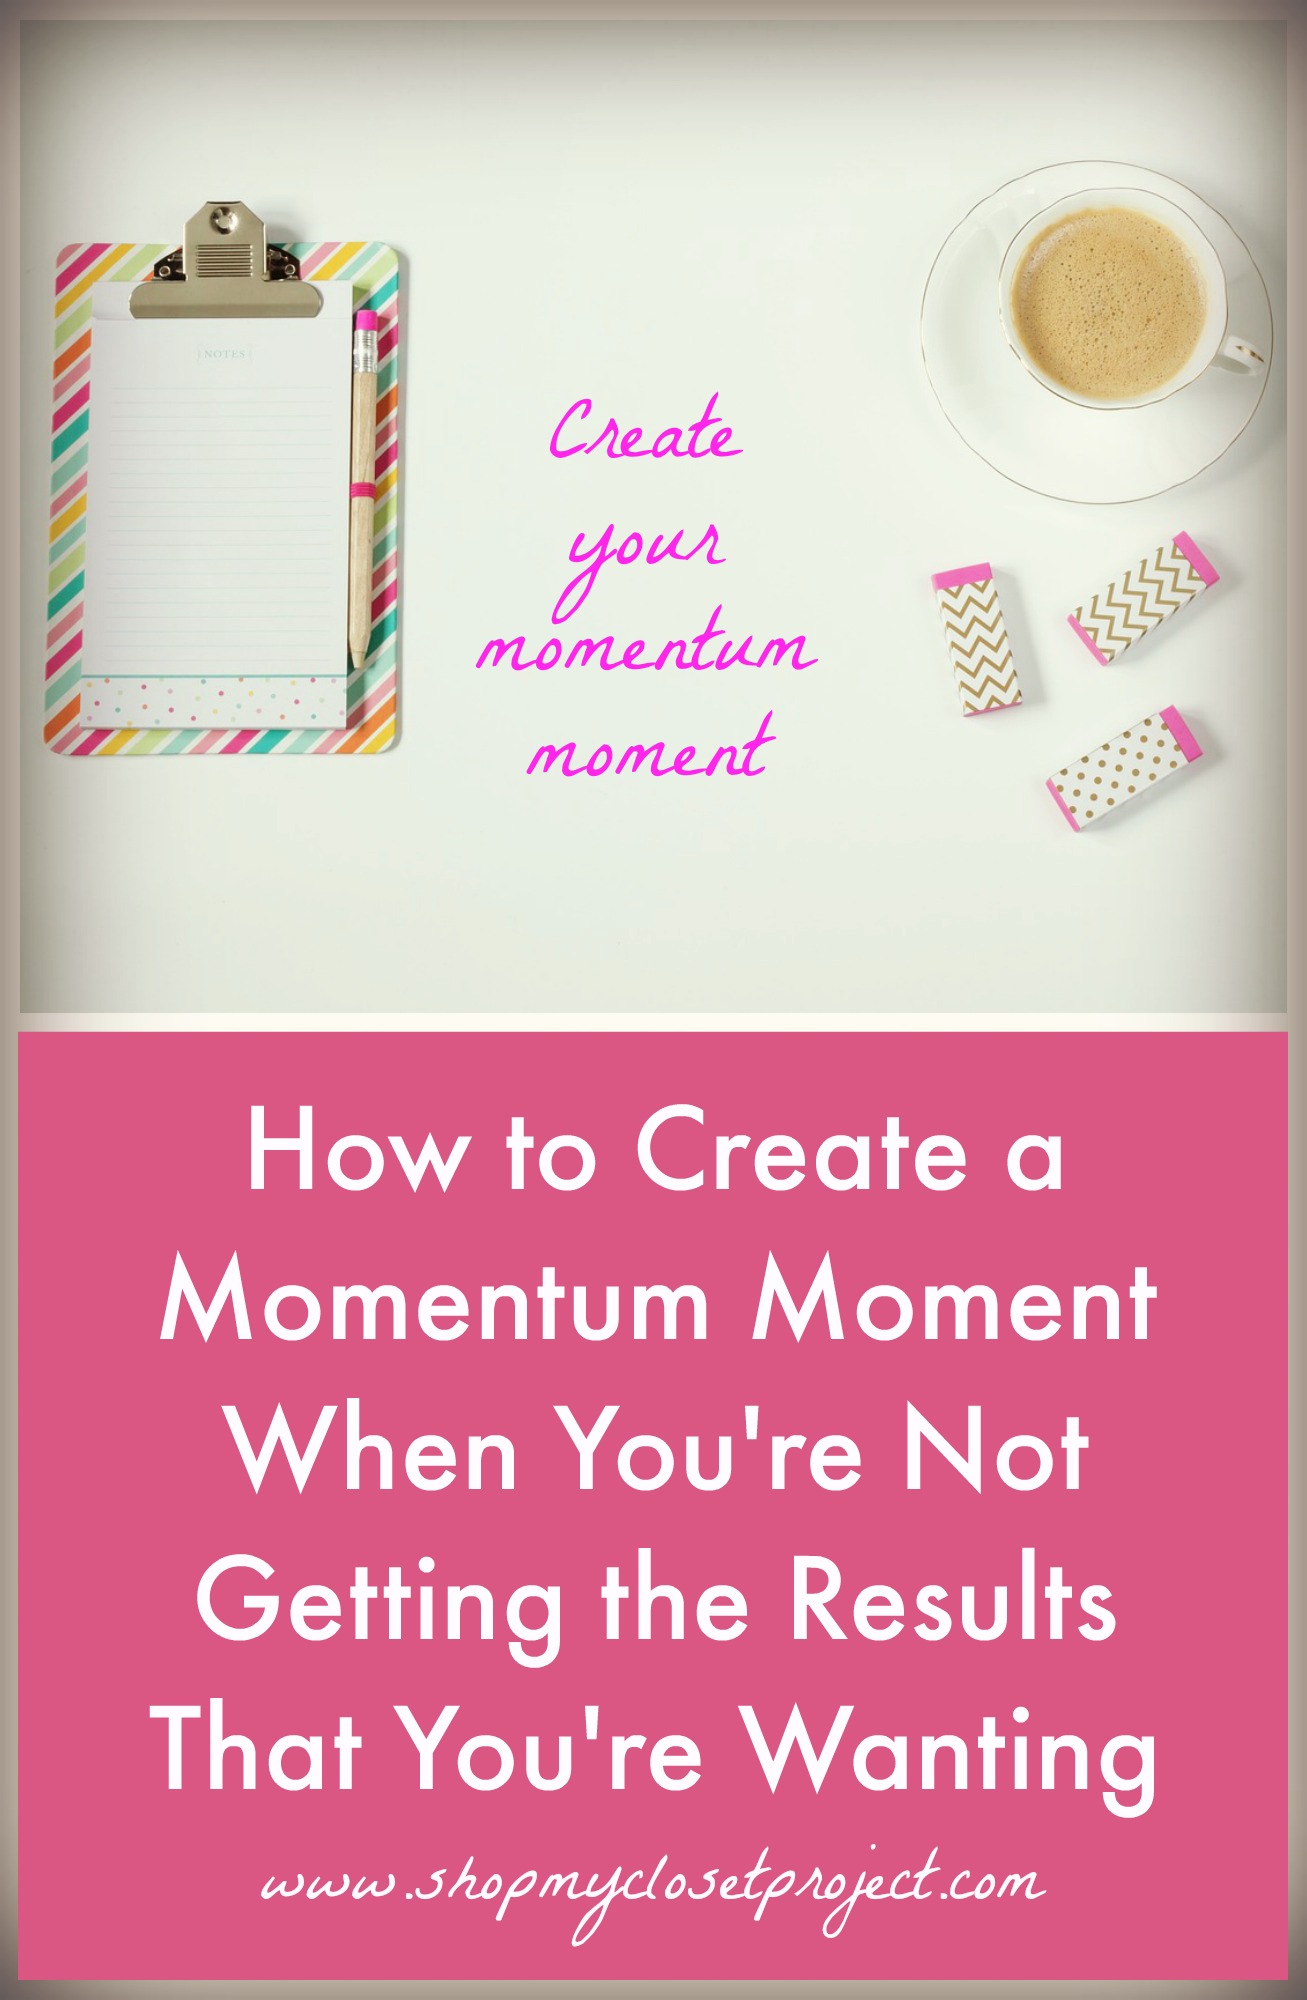 How to Create a Momentum Moment When You’re Not Getting the Results That You’re Wanting